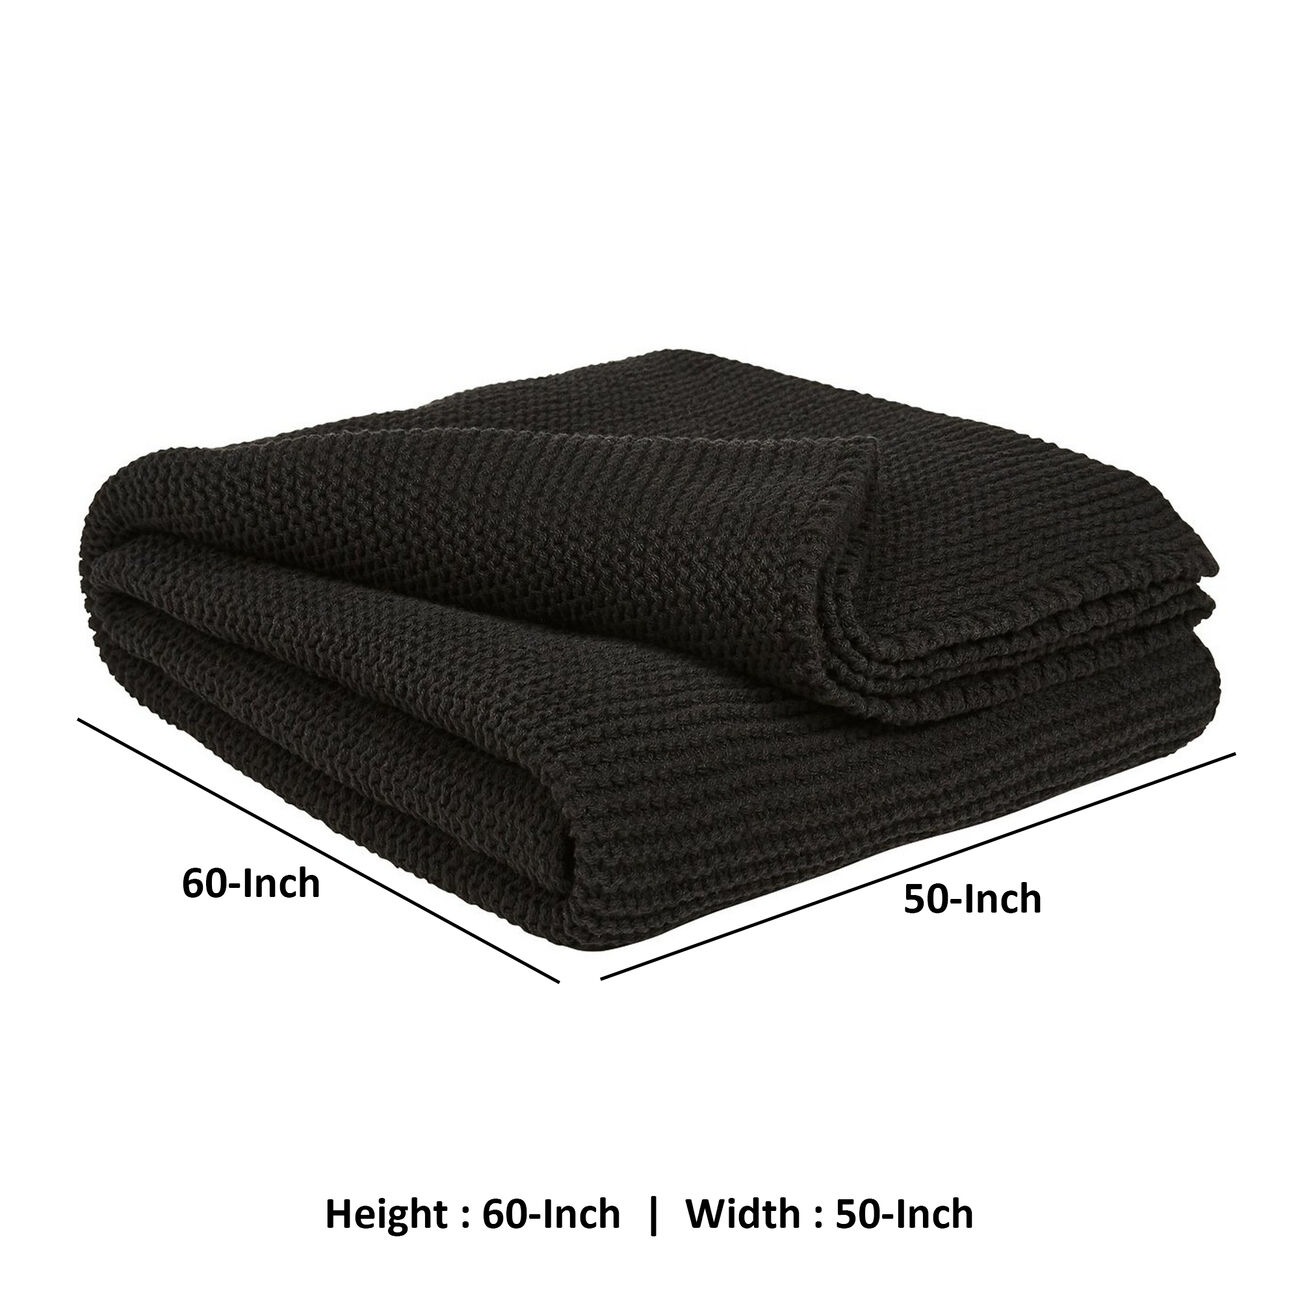 Fabric Throw Blanket with Knitted Design, Set of 3, Black